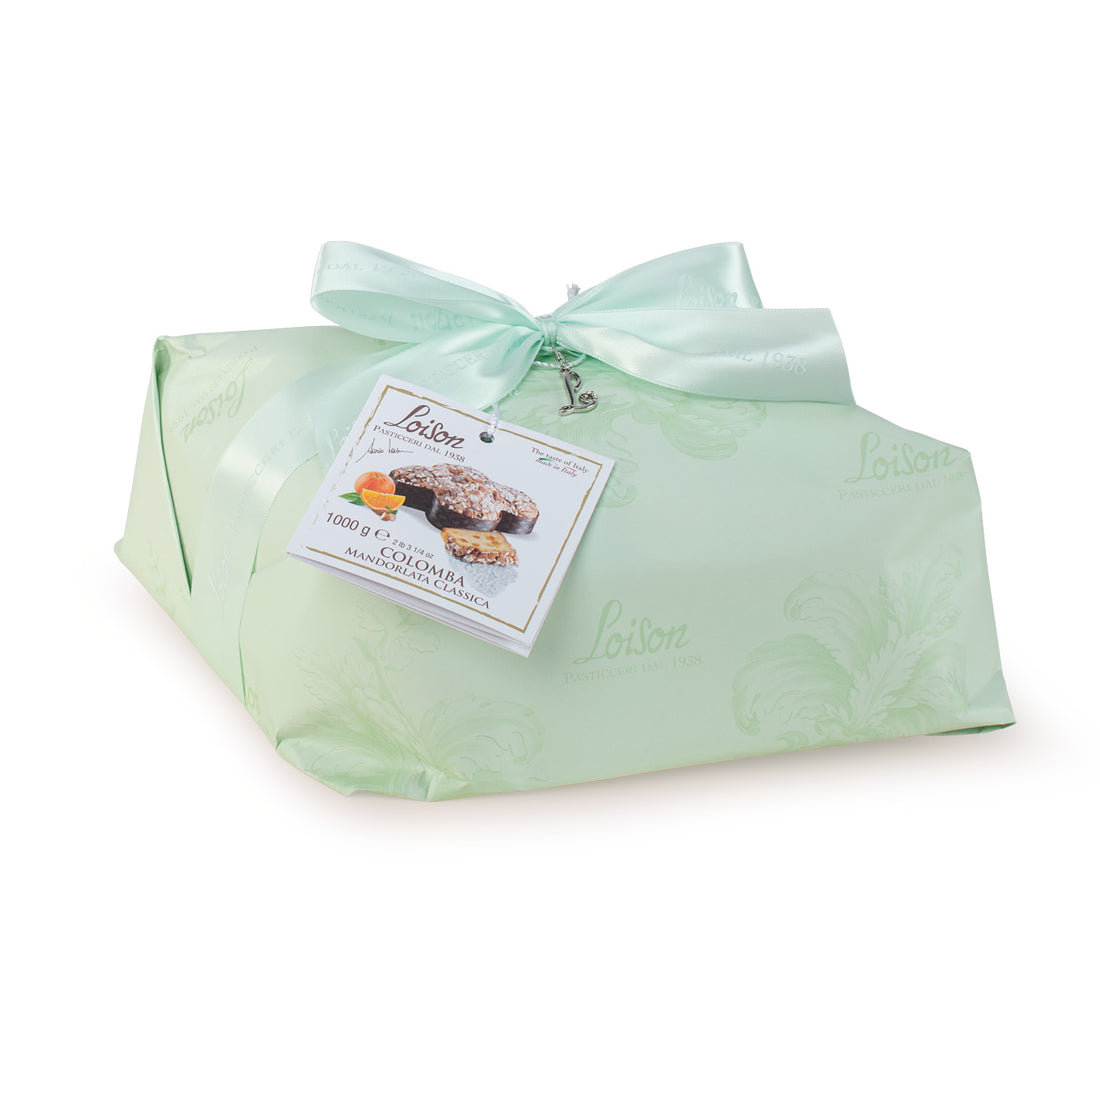 Classic Colomba Handwrapped